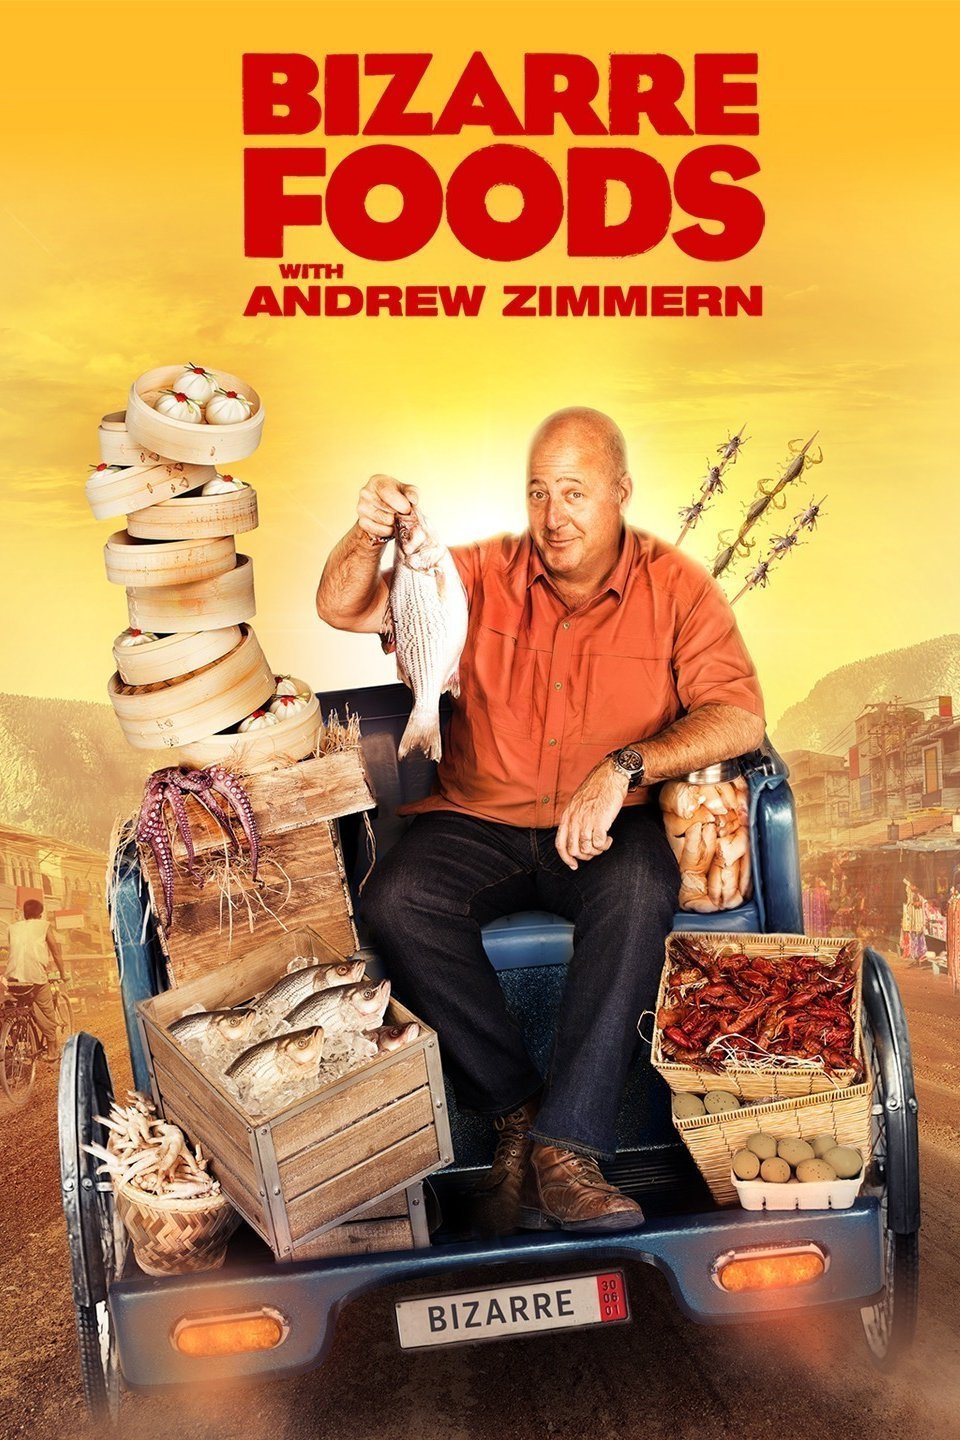 Poster of the movie Bizarre Foods with Andrew Zimmern